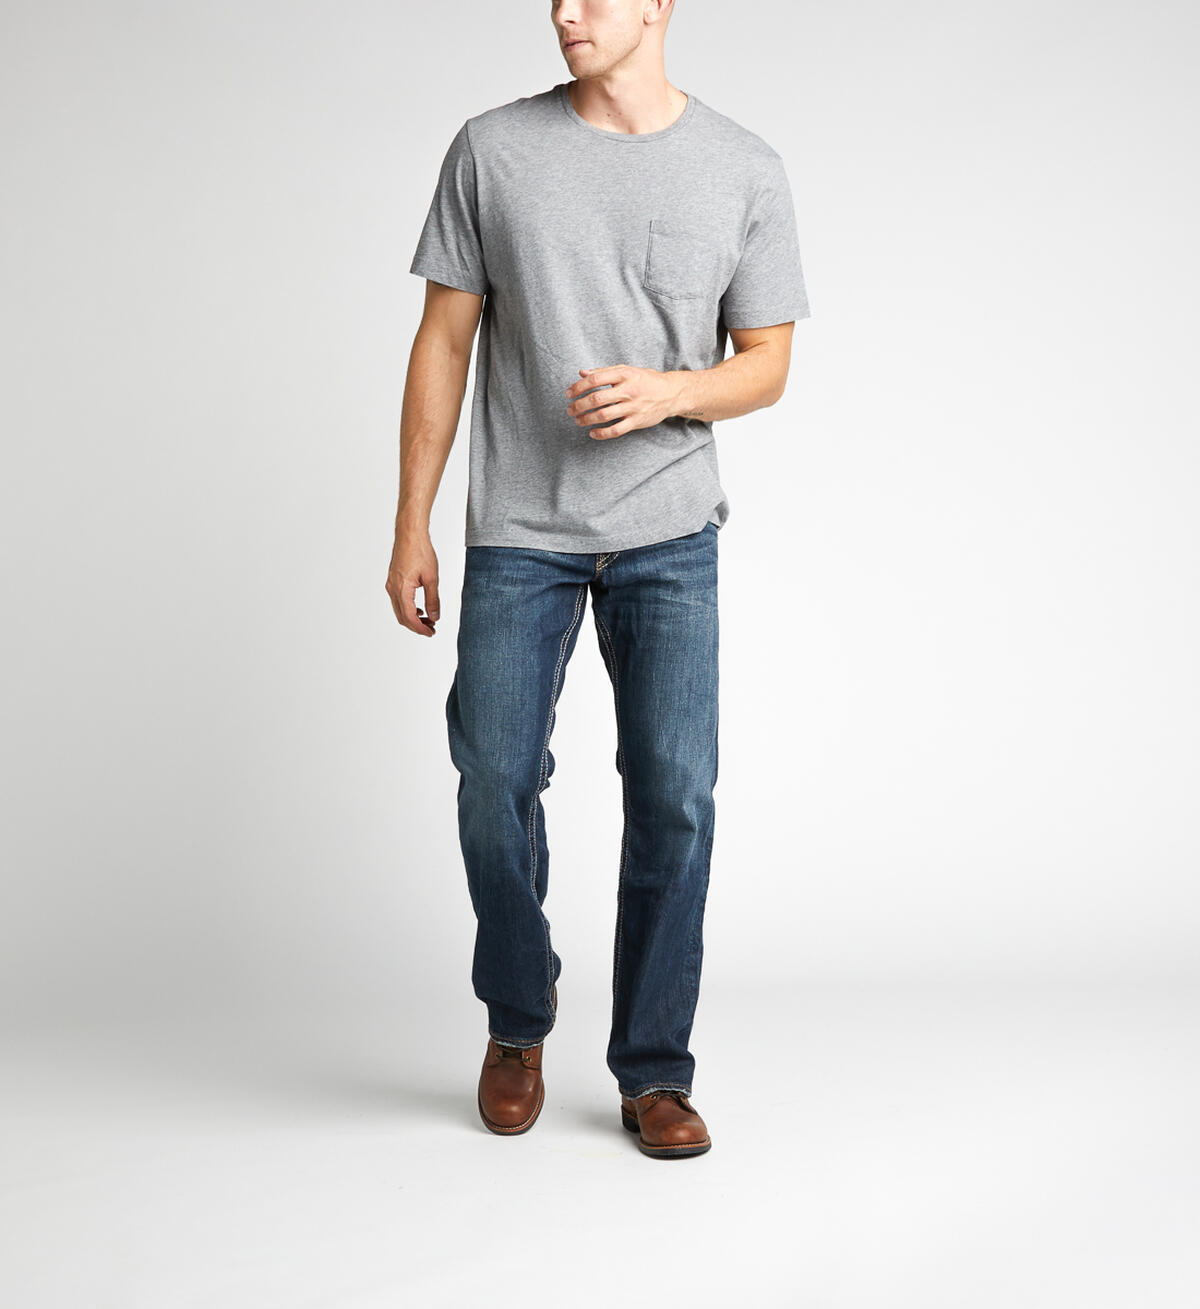 Zac Relaxed Fit Straight Leg Jeans, Indigo, hi-res image number 3